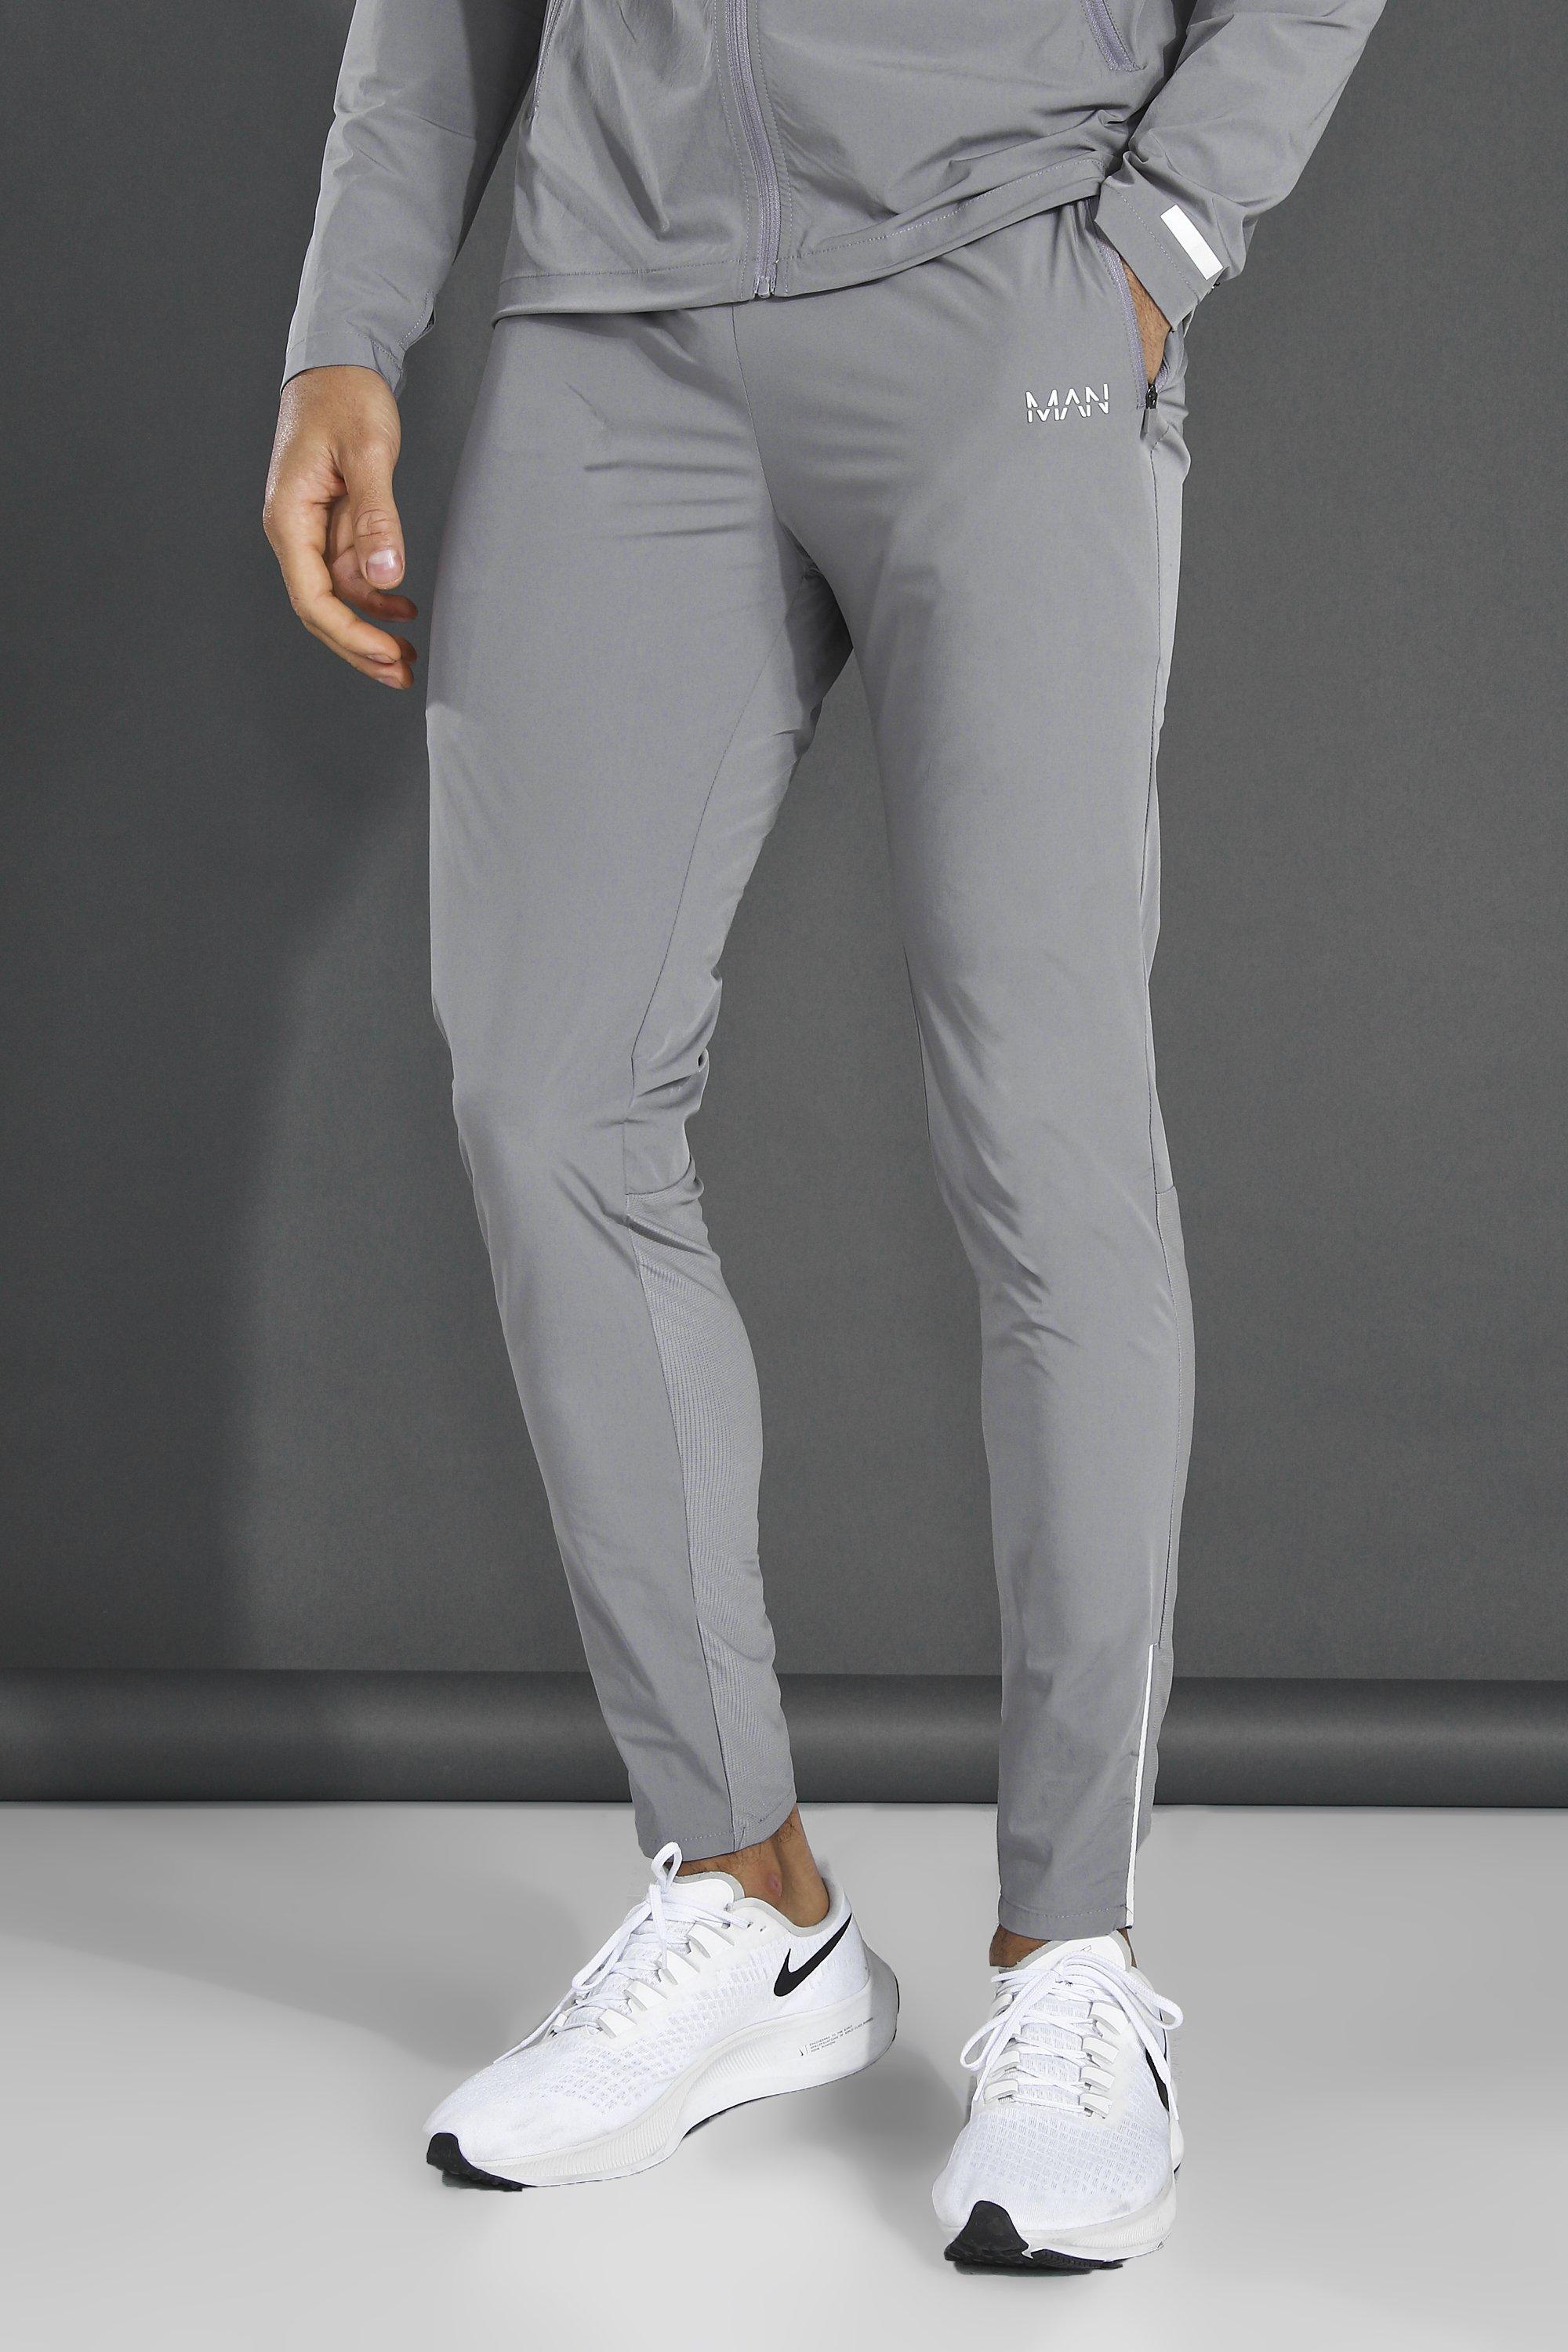 Plain Grey Trouser 2021 New Collection Sweatpants Gym Sports Wear Casual  Fashion Trousers For Men